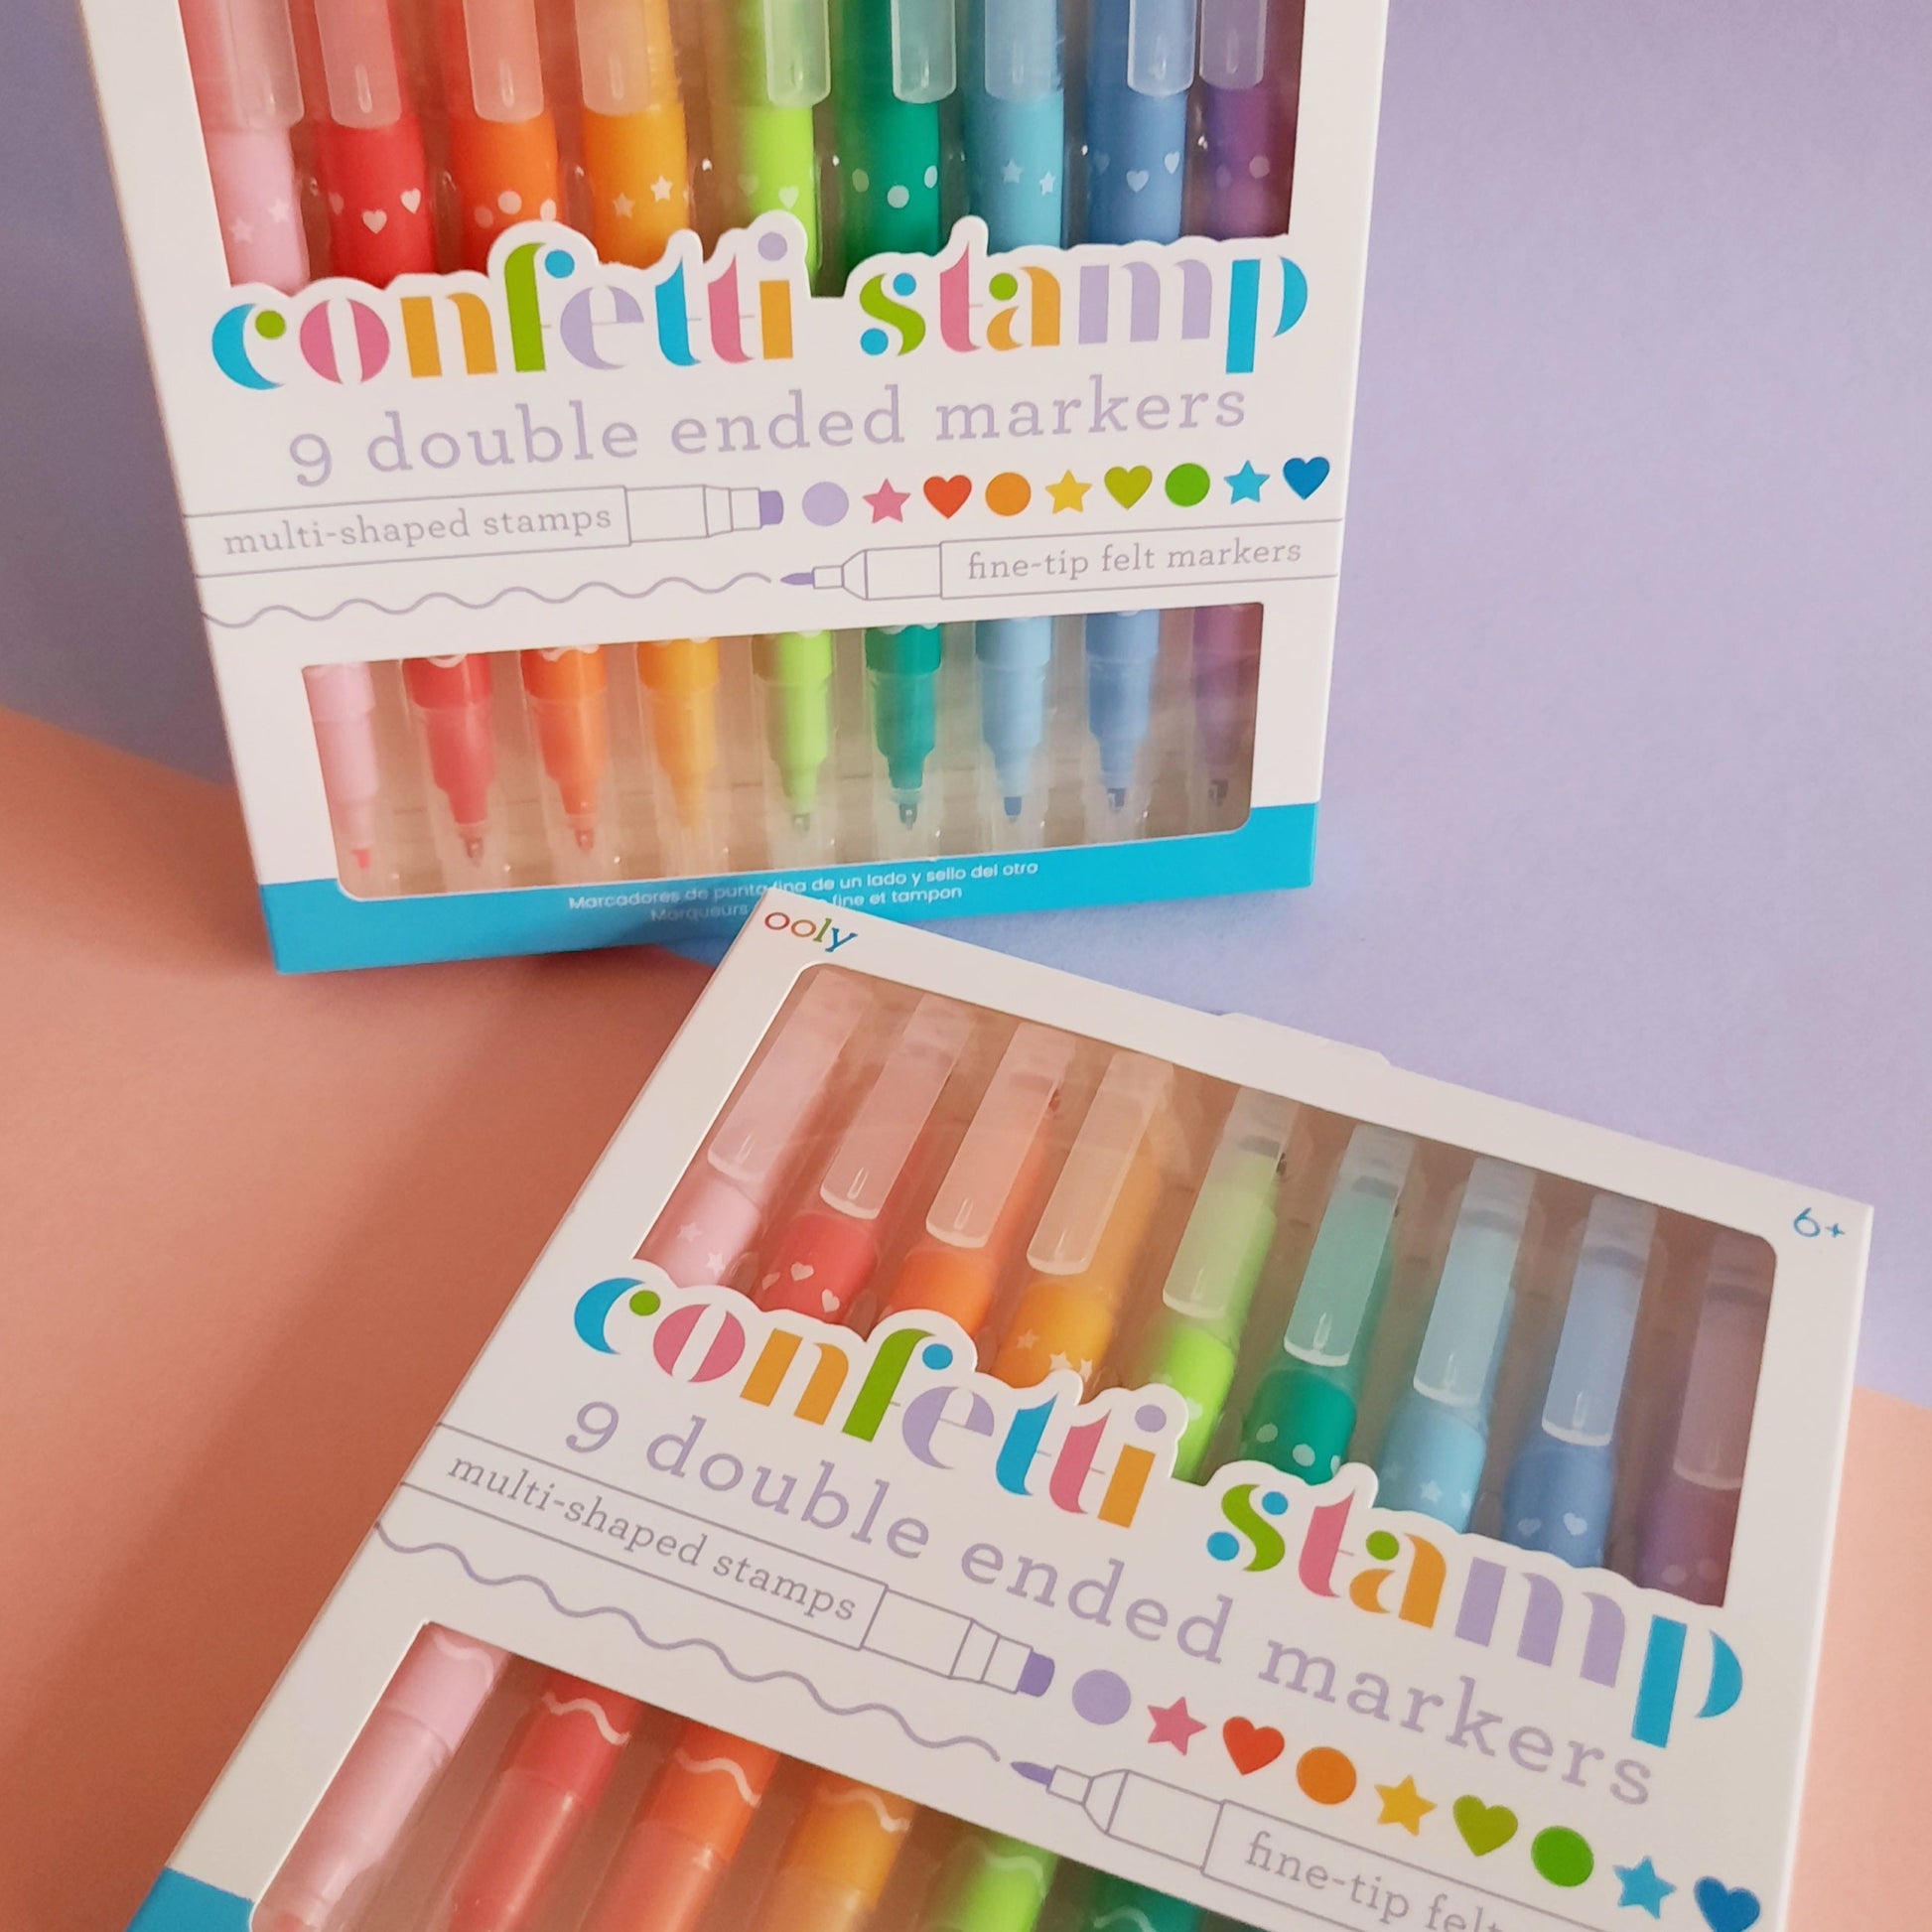 Ooly Confetti Stamp 9 Double Ended Markers